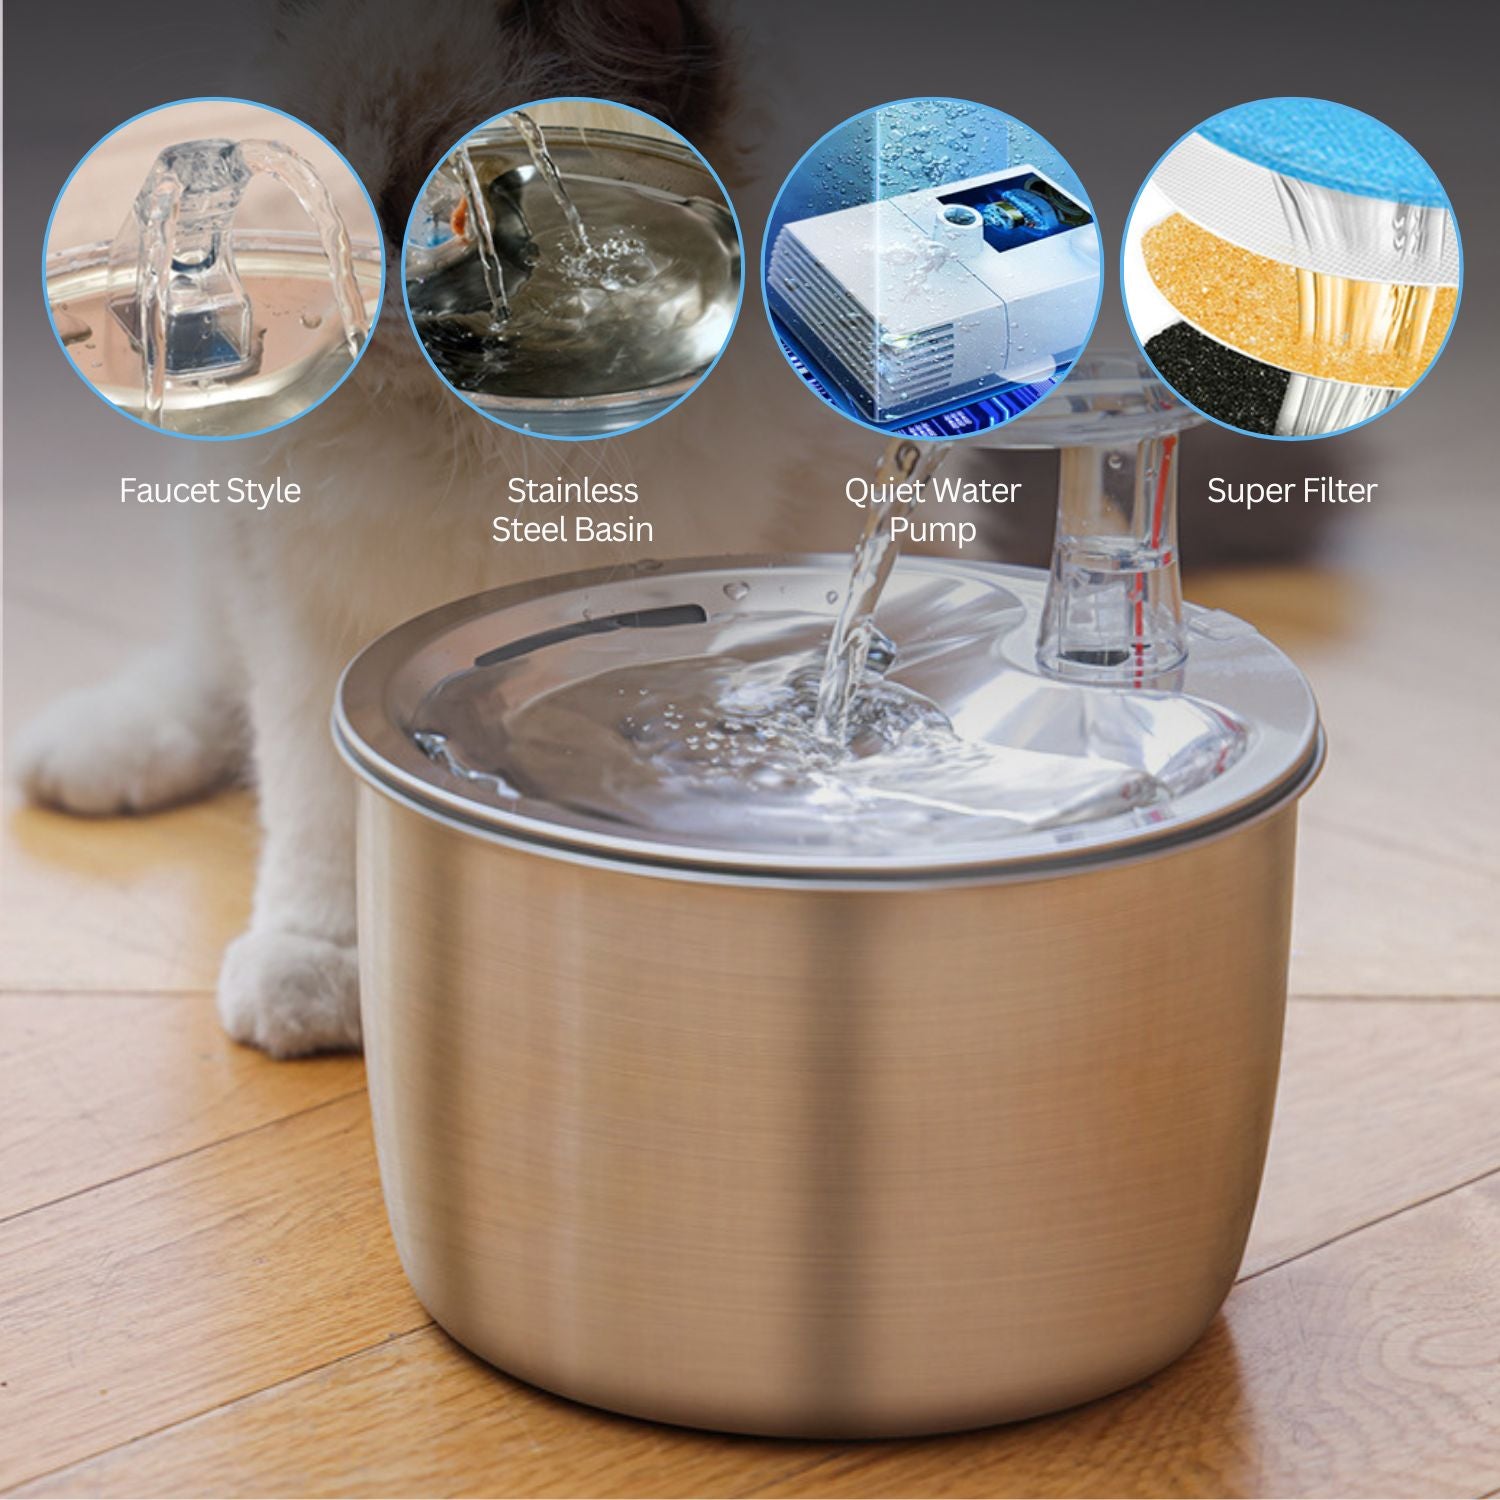 2L Stainless Steel Pet Water Fountain for Cats and Small Dogs FI-WD-115-FT